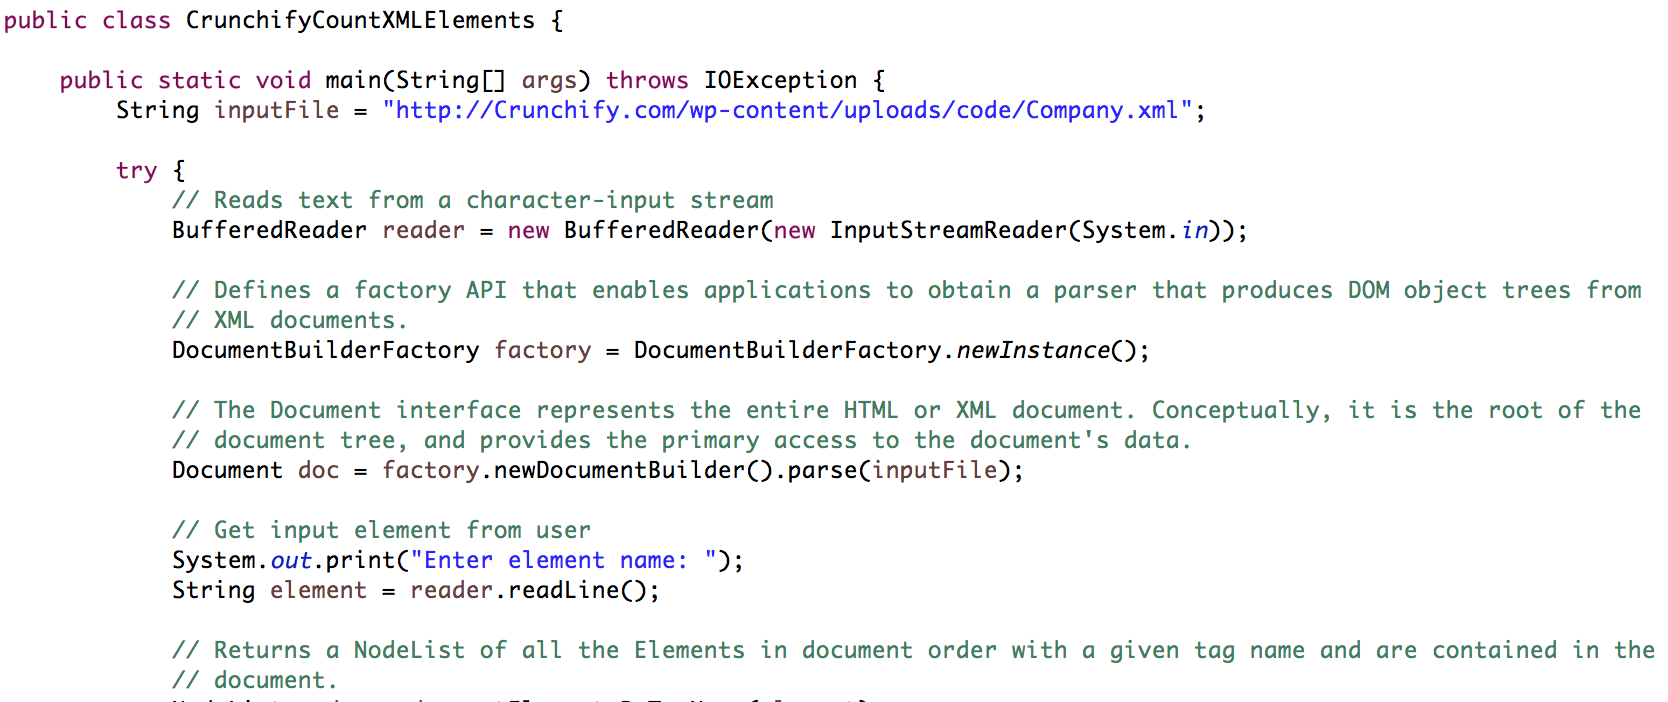 eclipse ide for eclipse committers mac